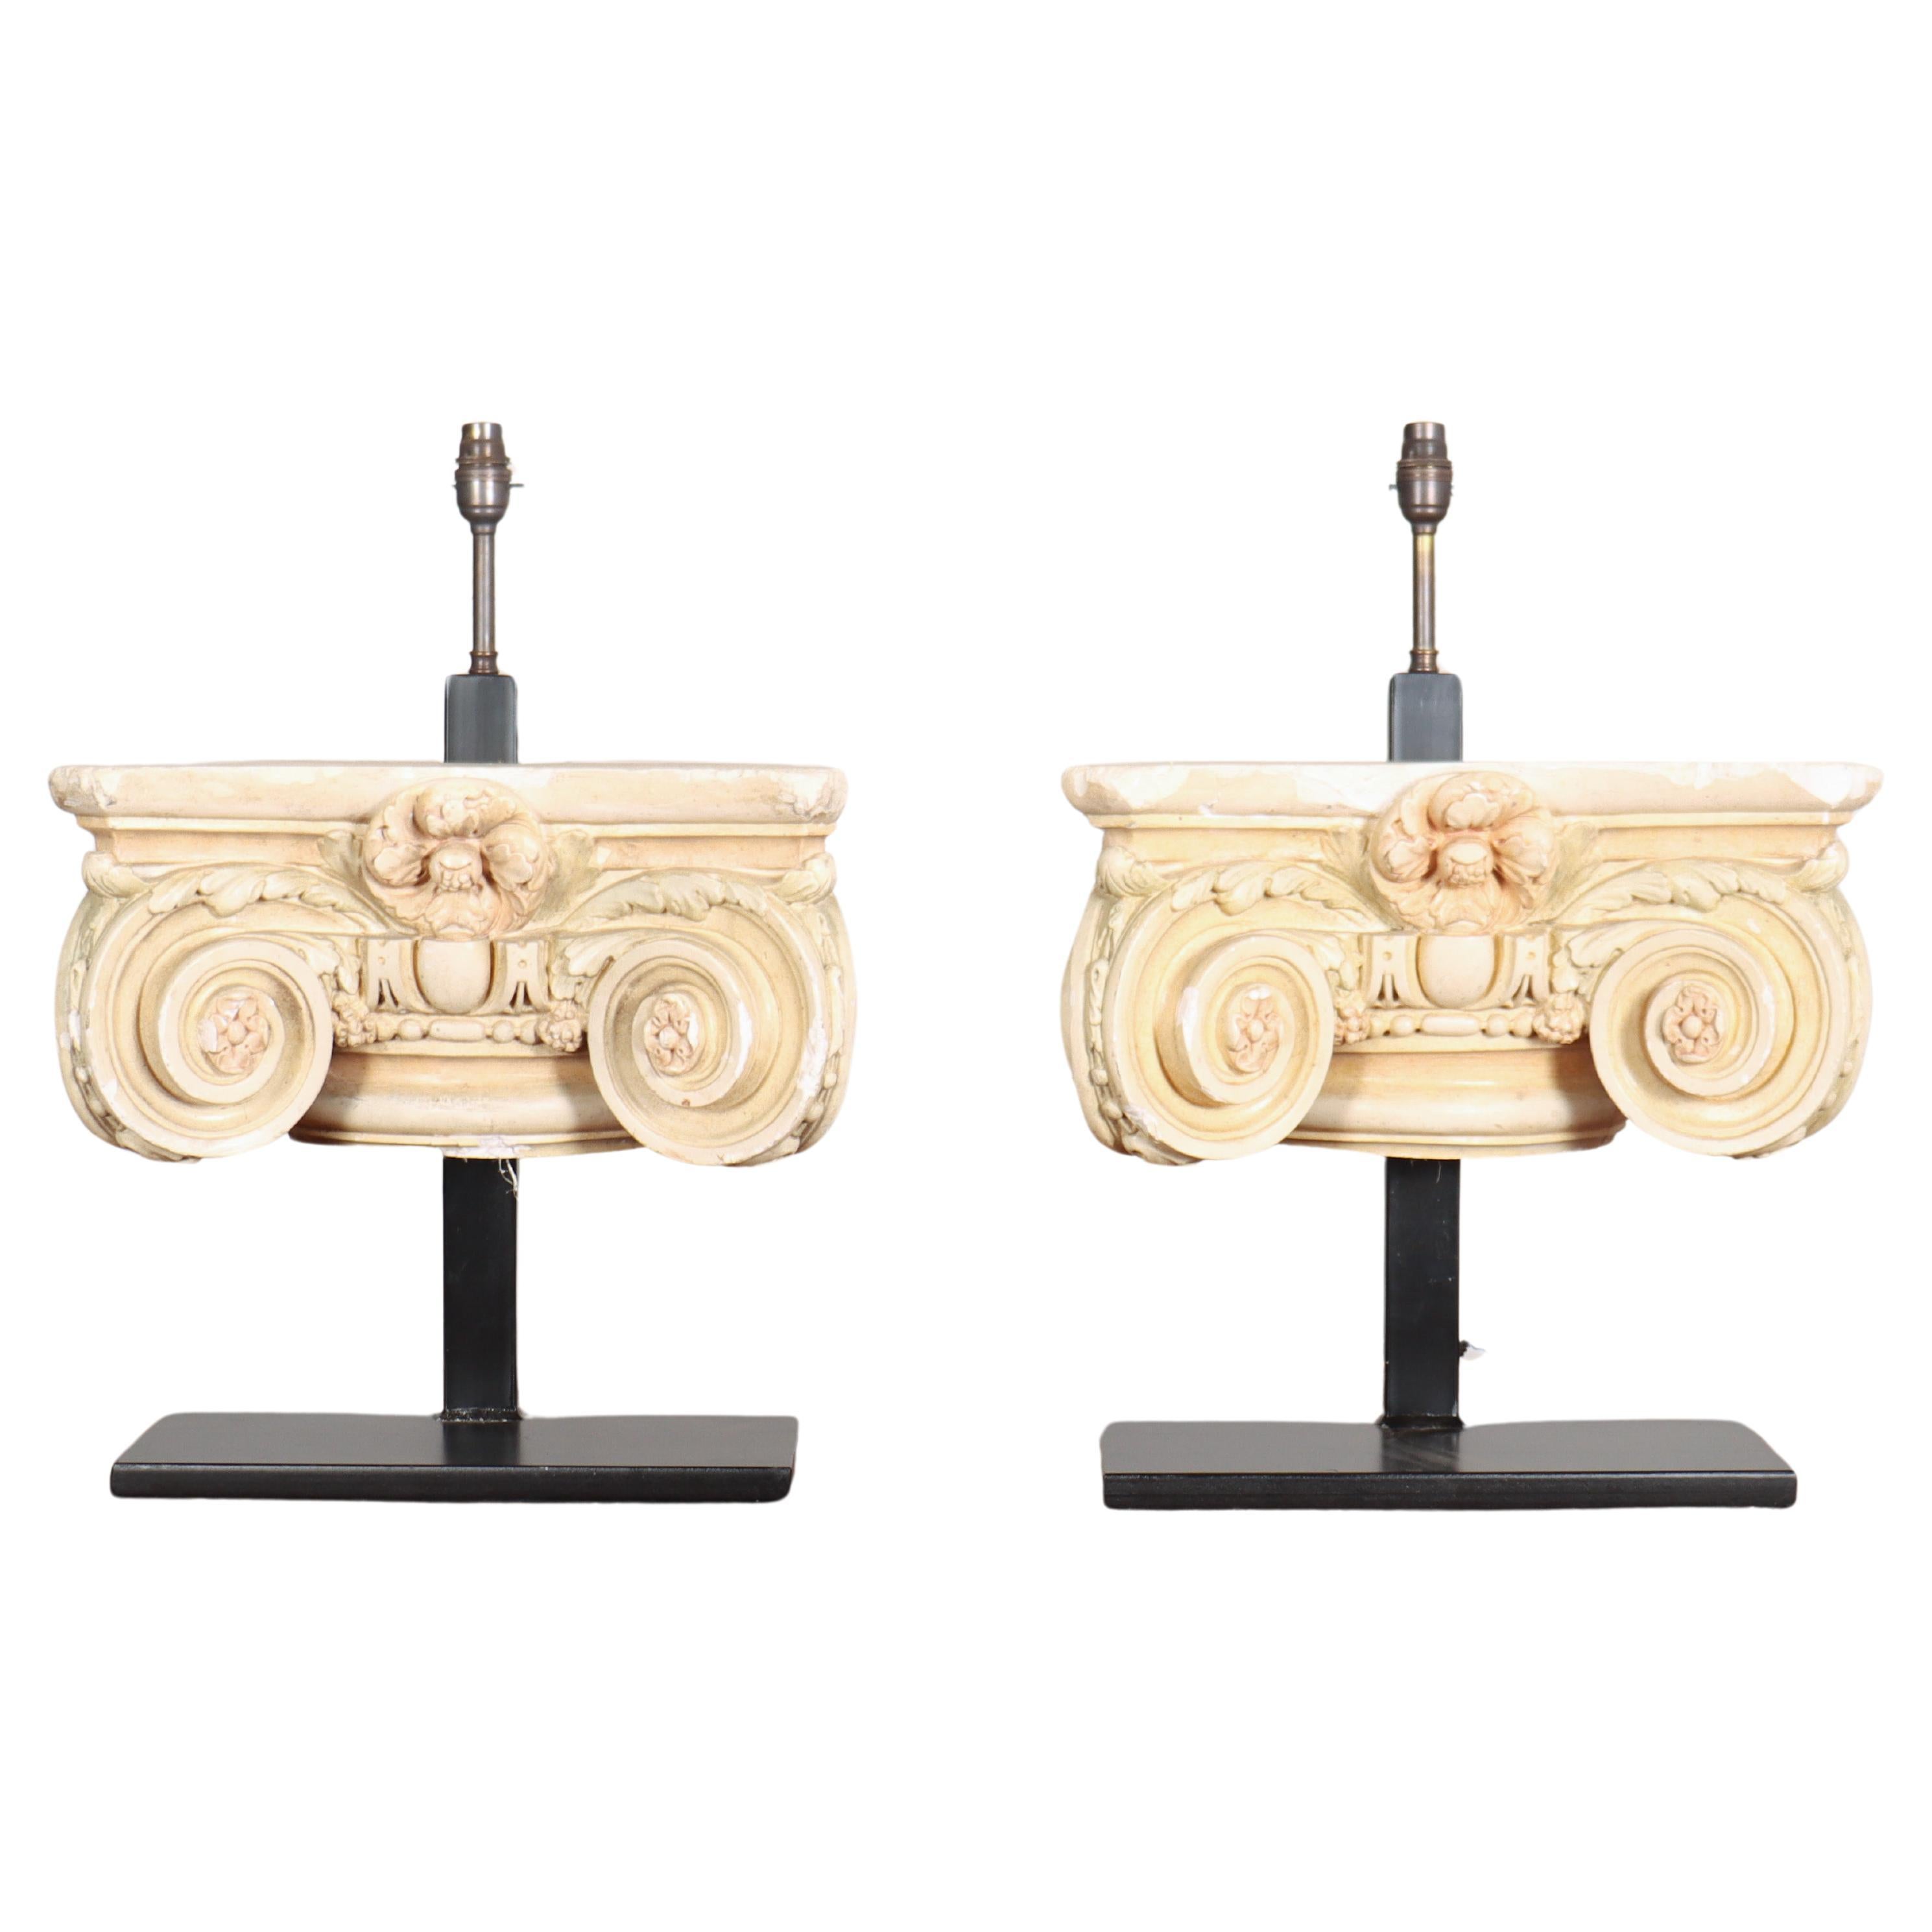 Pair of Decorative Table Lamps For Sale